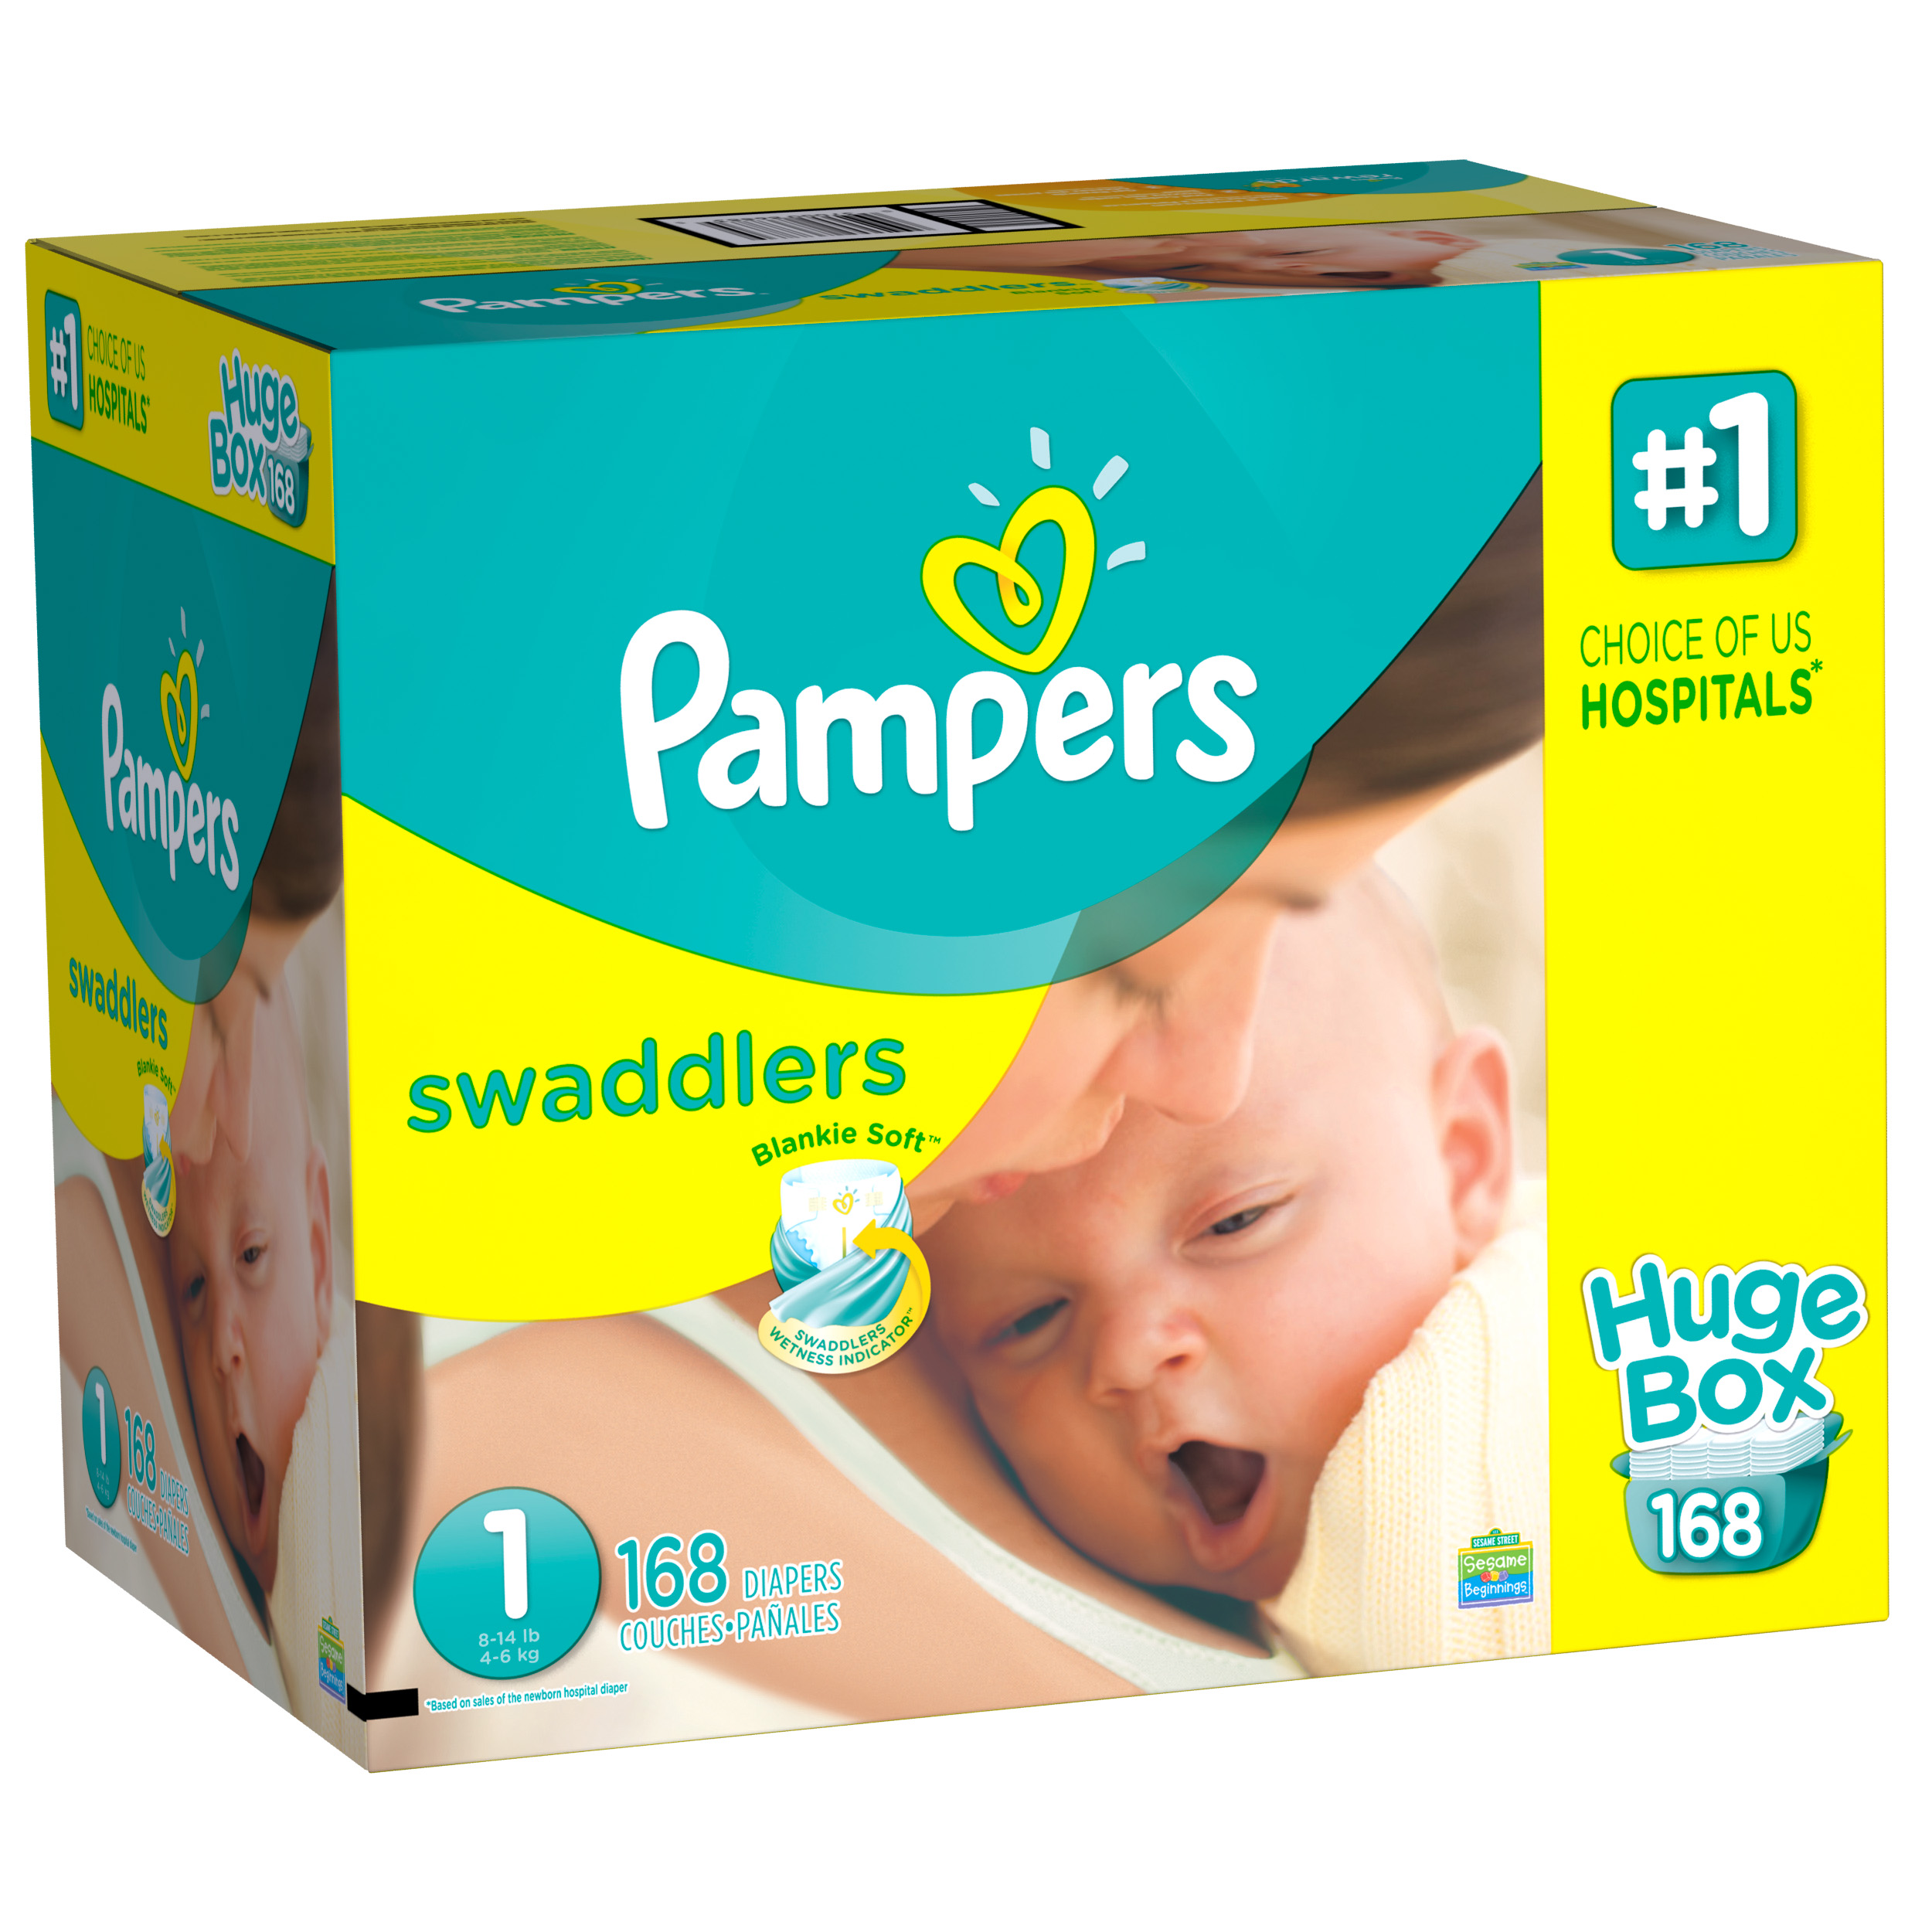 Pampers Swaddlers Soft and Absorbent Newborn Diapers, Size 1, 168 Ct - image 4 of 10